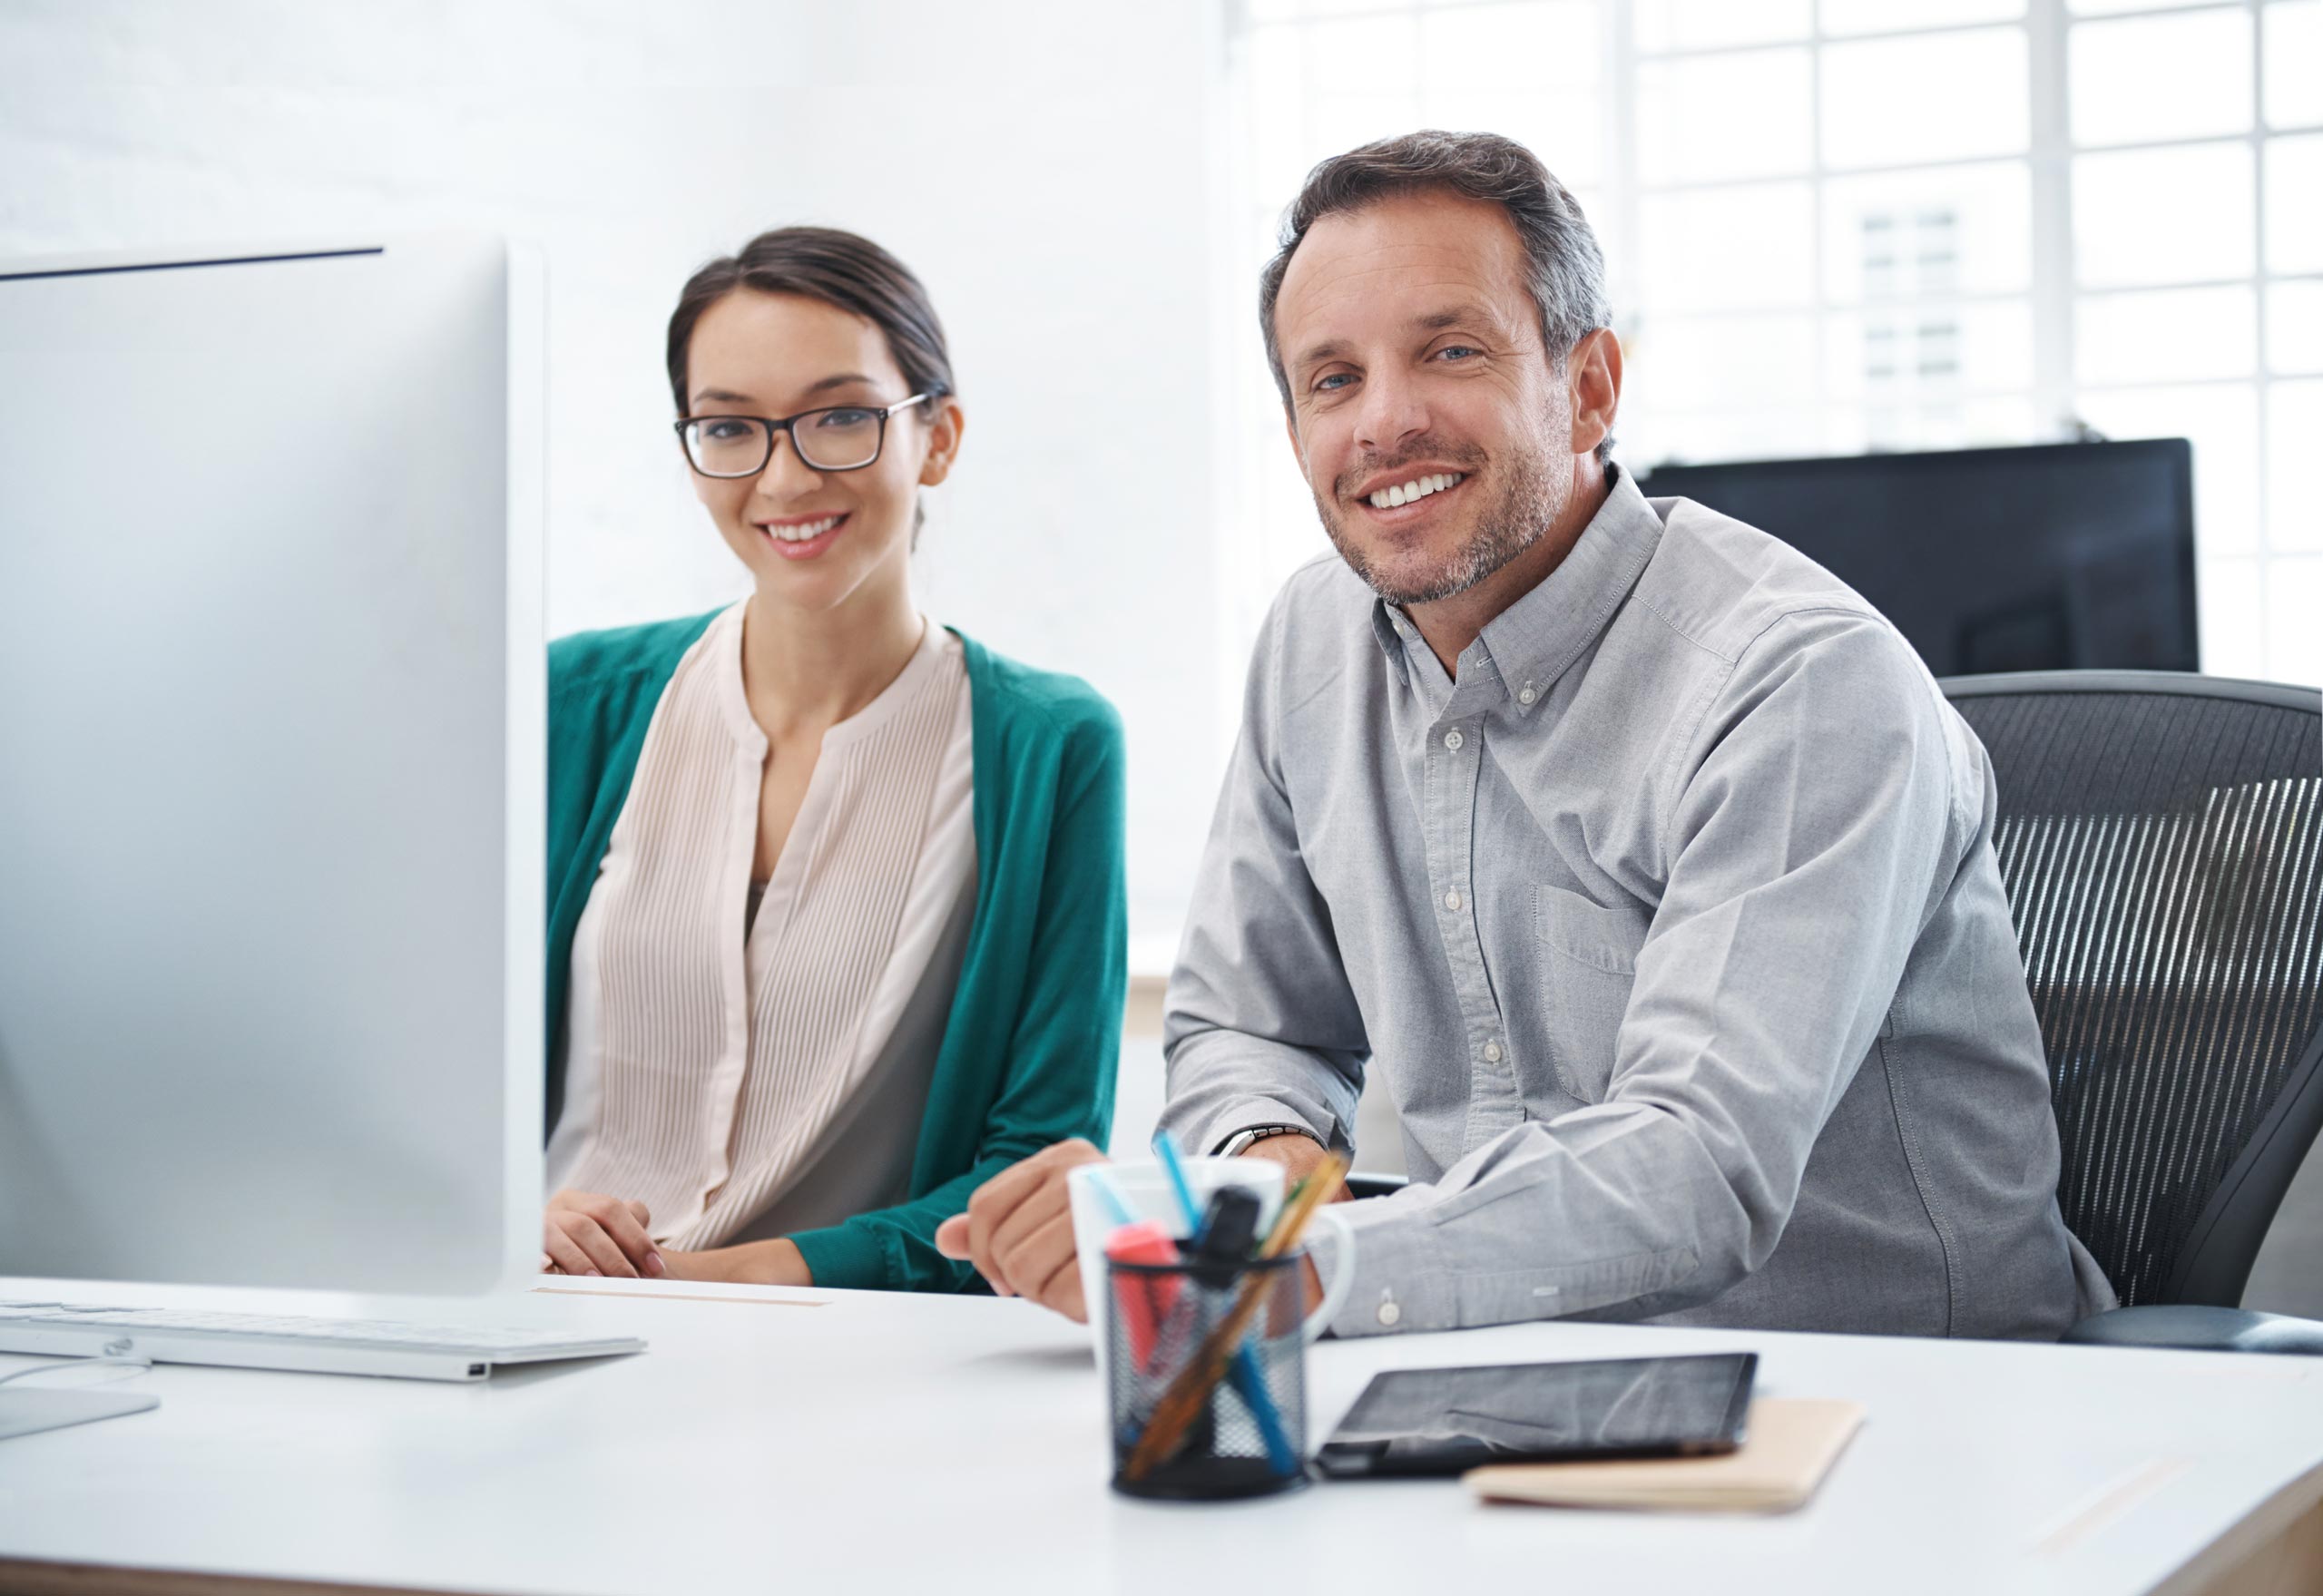 Young woman and man sitting in front of an iMac, smiling to the camera